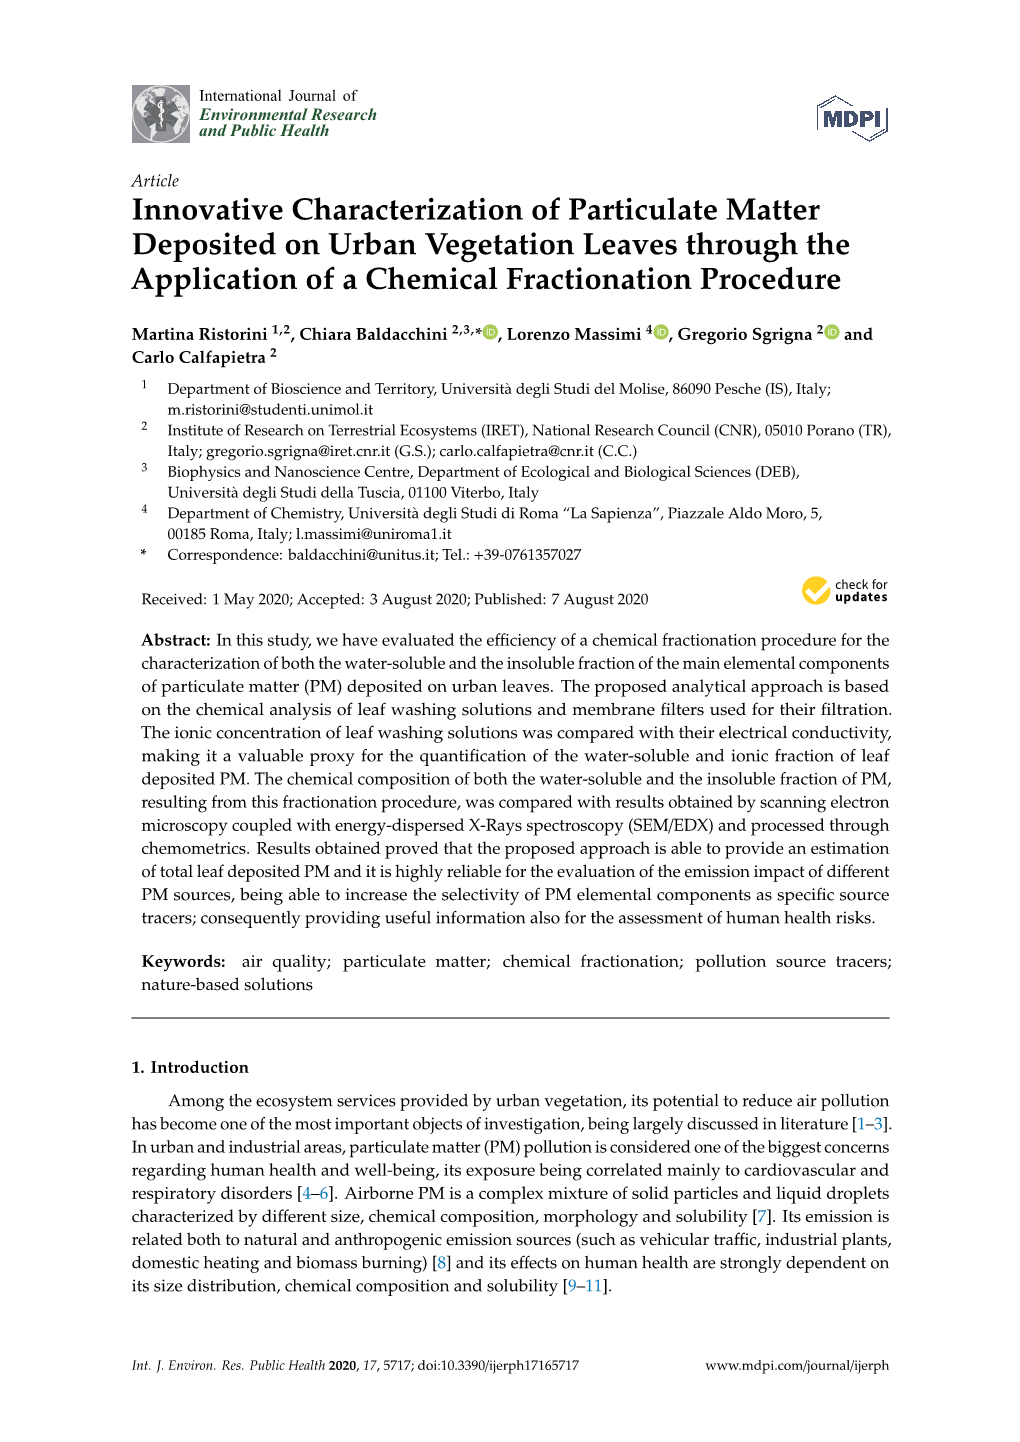 Innovative Characterization of Particulate Matter Deposited on Urban Vegetation Leaves Through the Application of a Chemical Fractionation Procedure